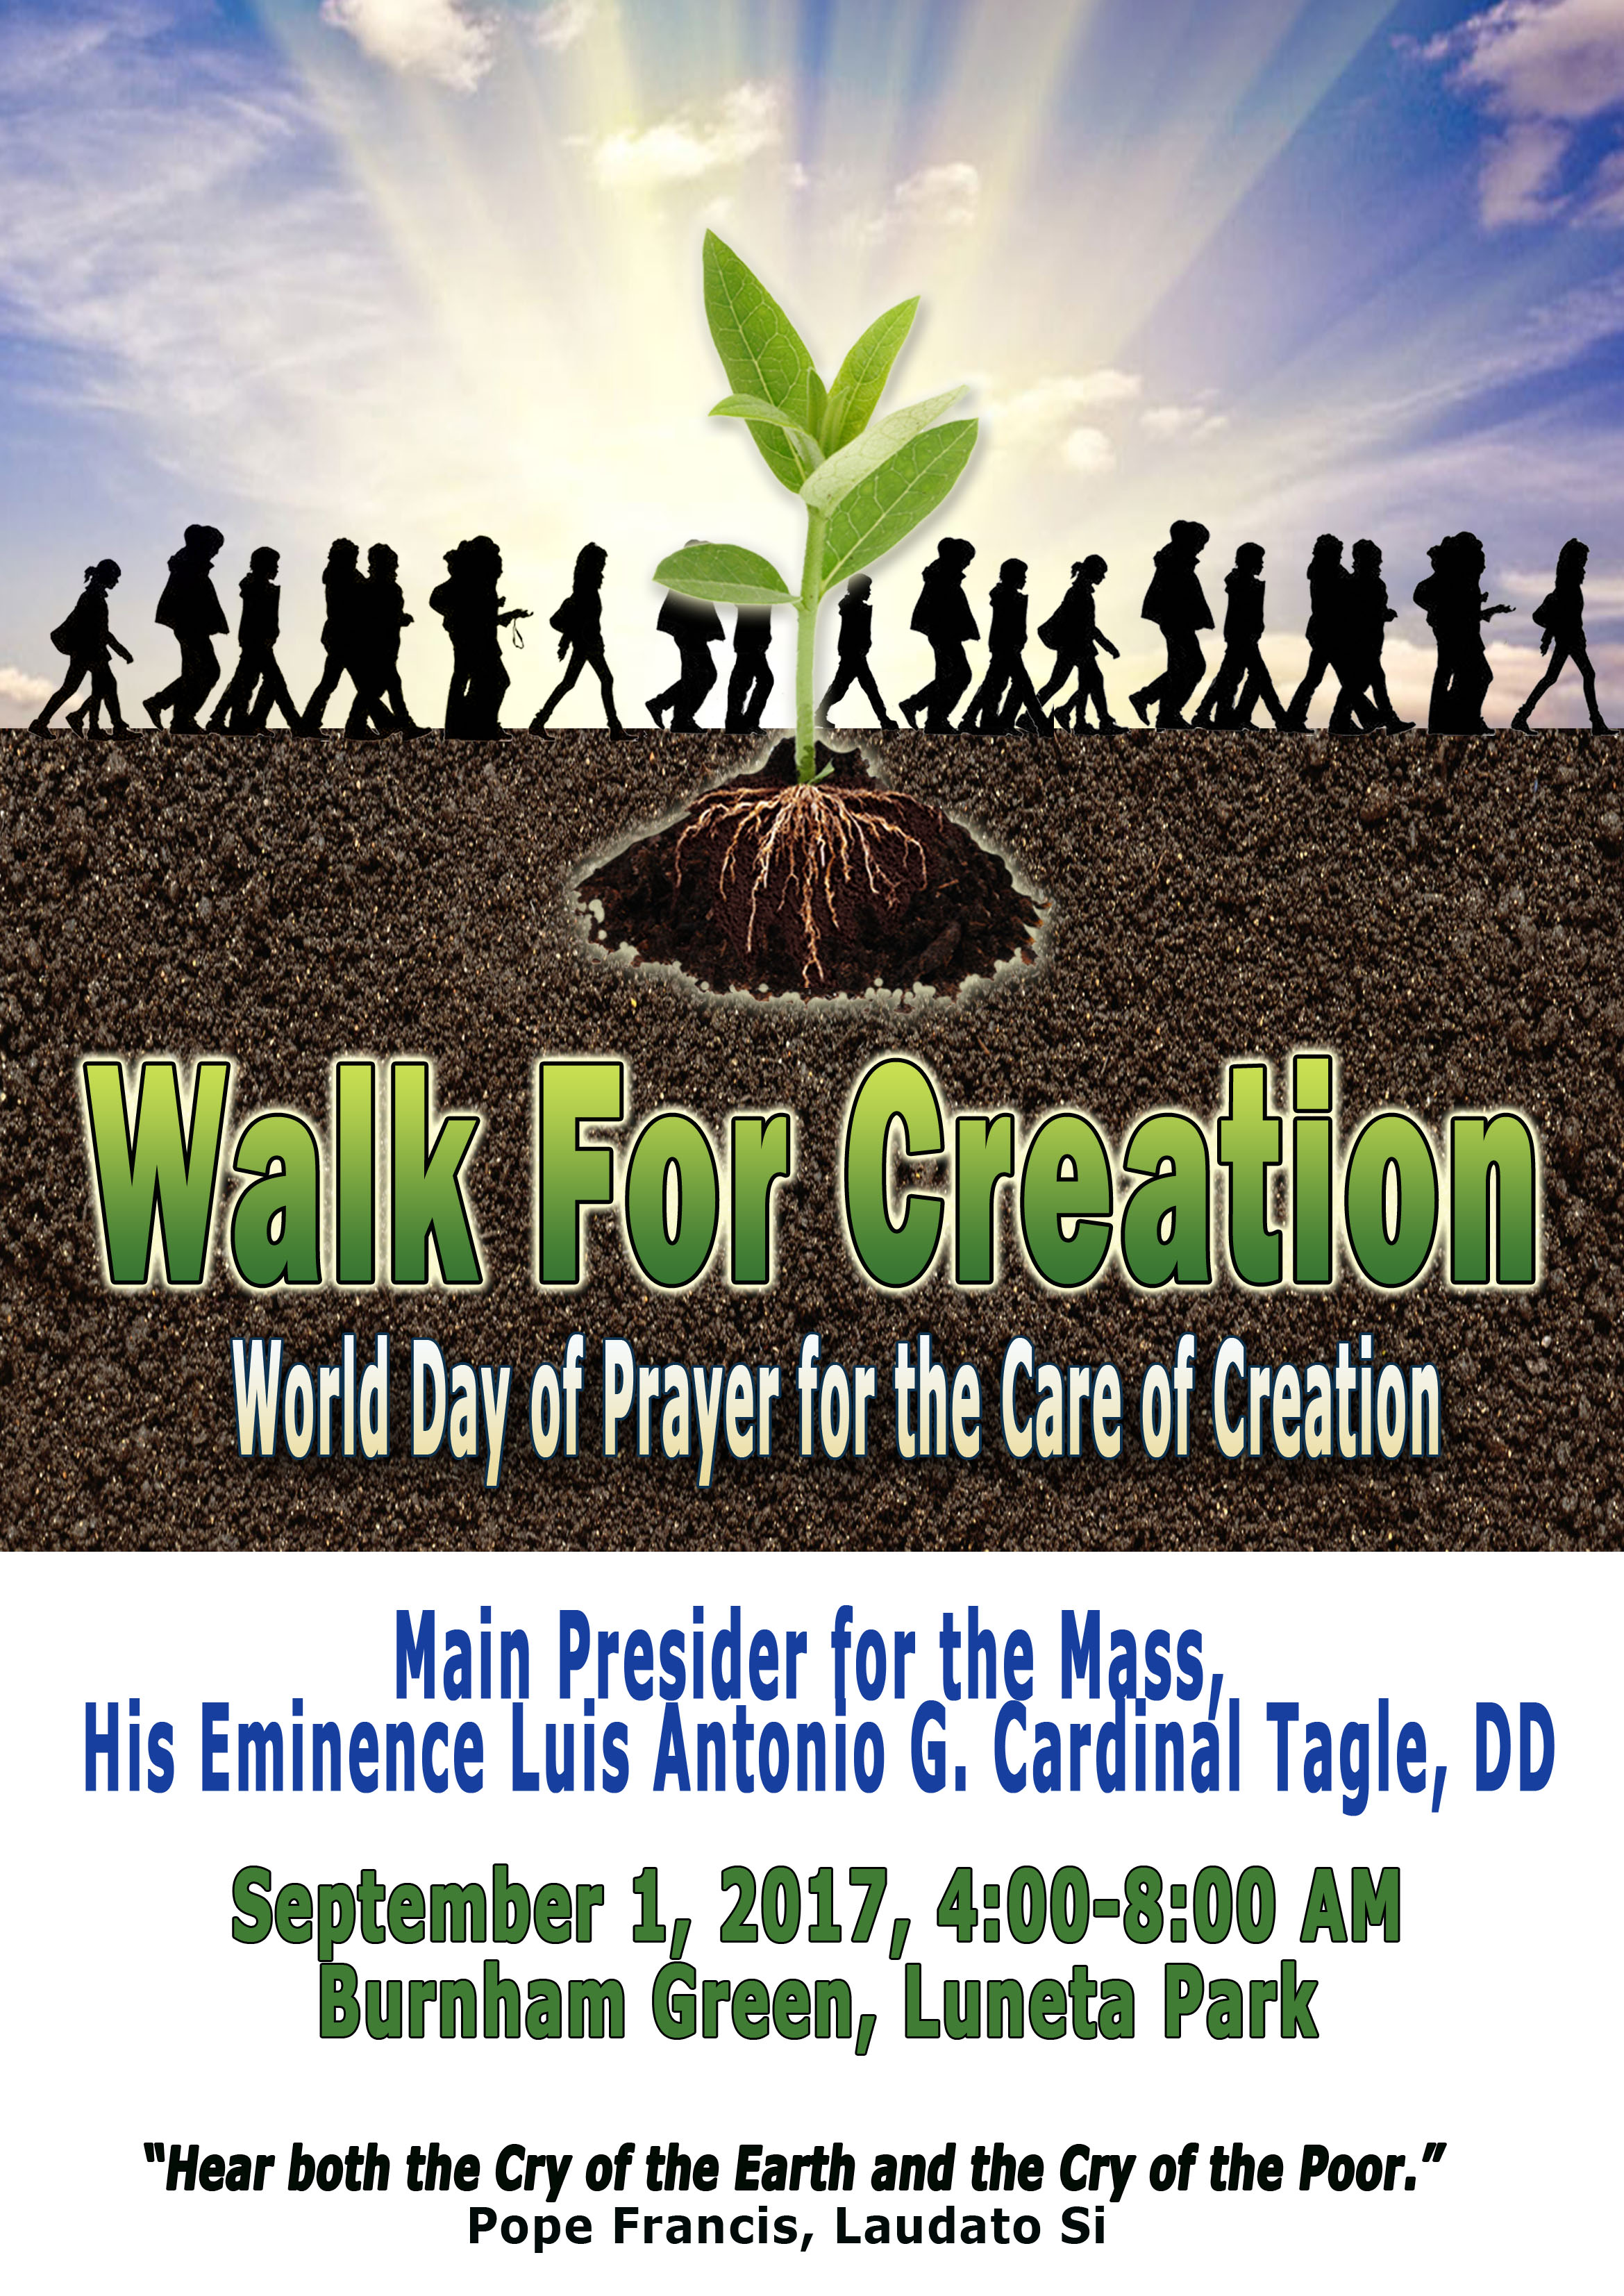 GLOBAL CLIMATE CHANGE MOVEMENT-PILIPINAS "WALK FOR CREATION": SEPTEMBER 1, 2017